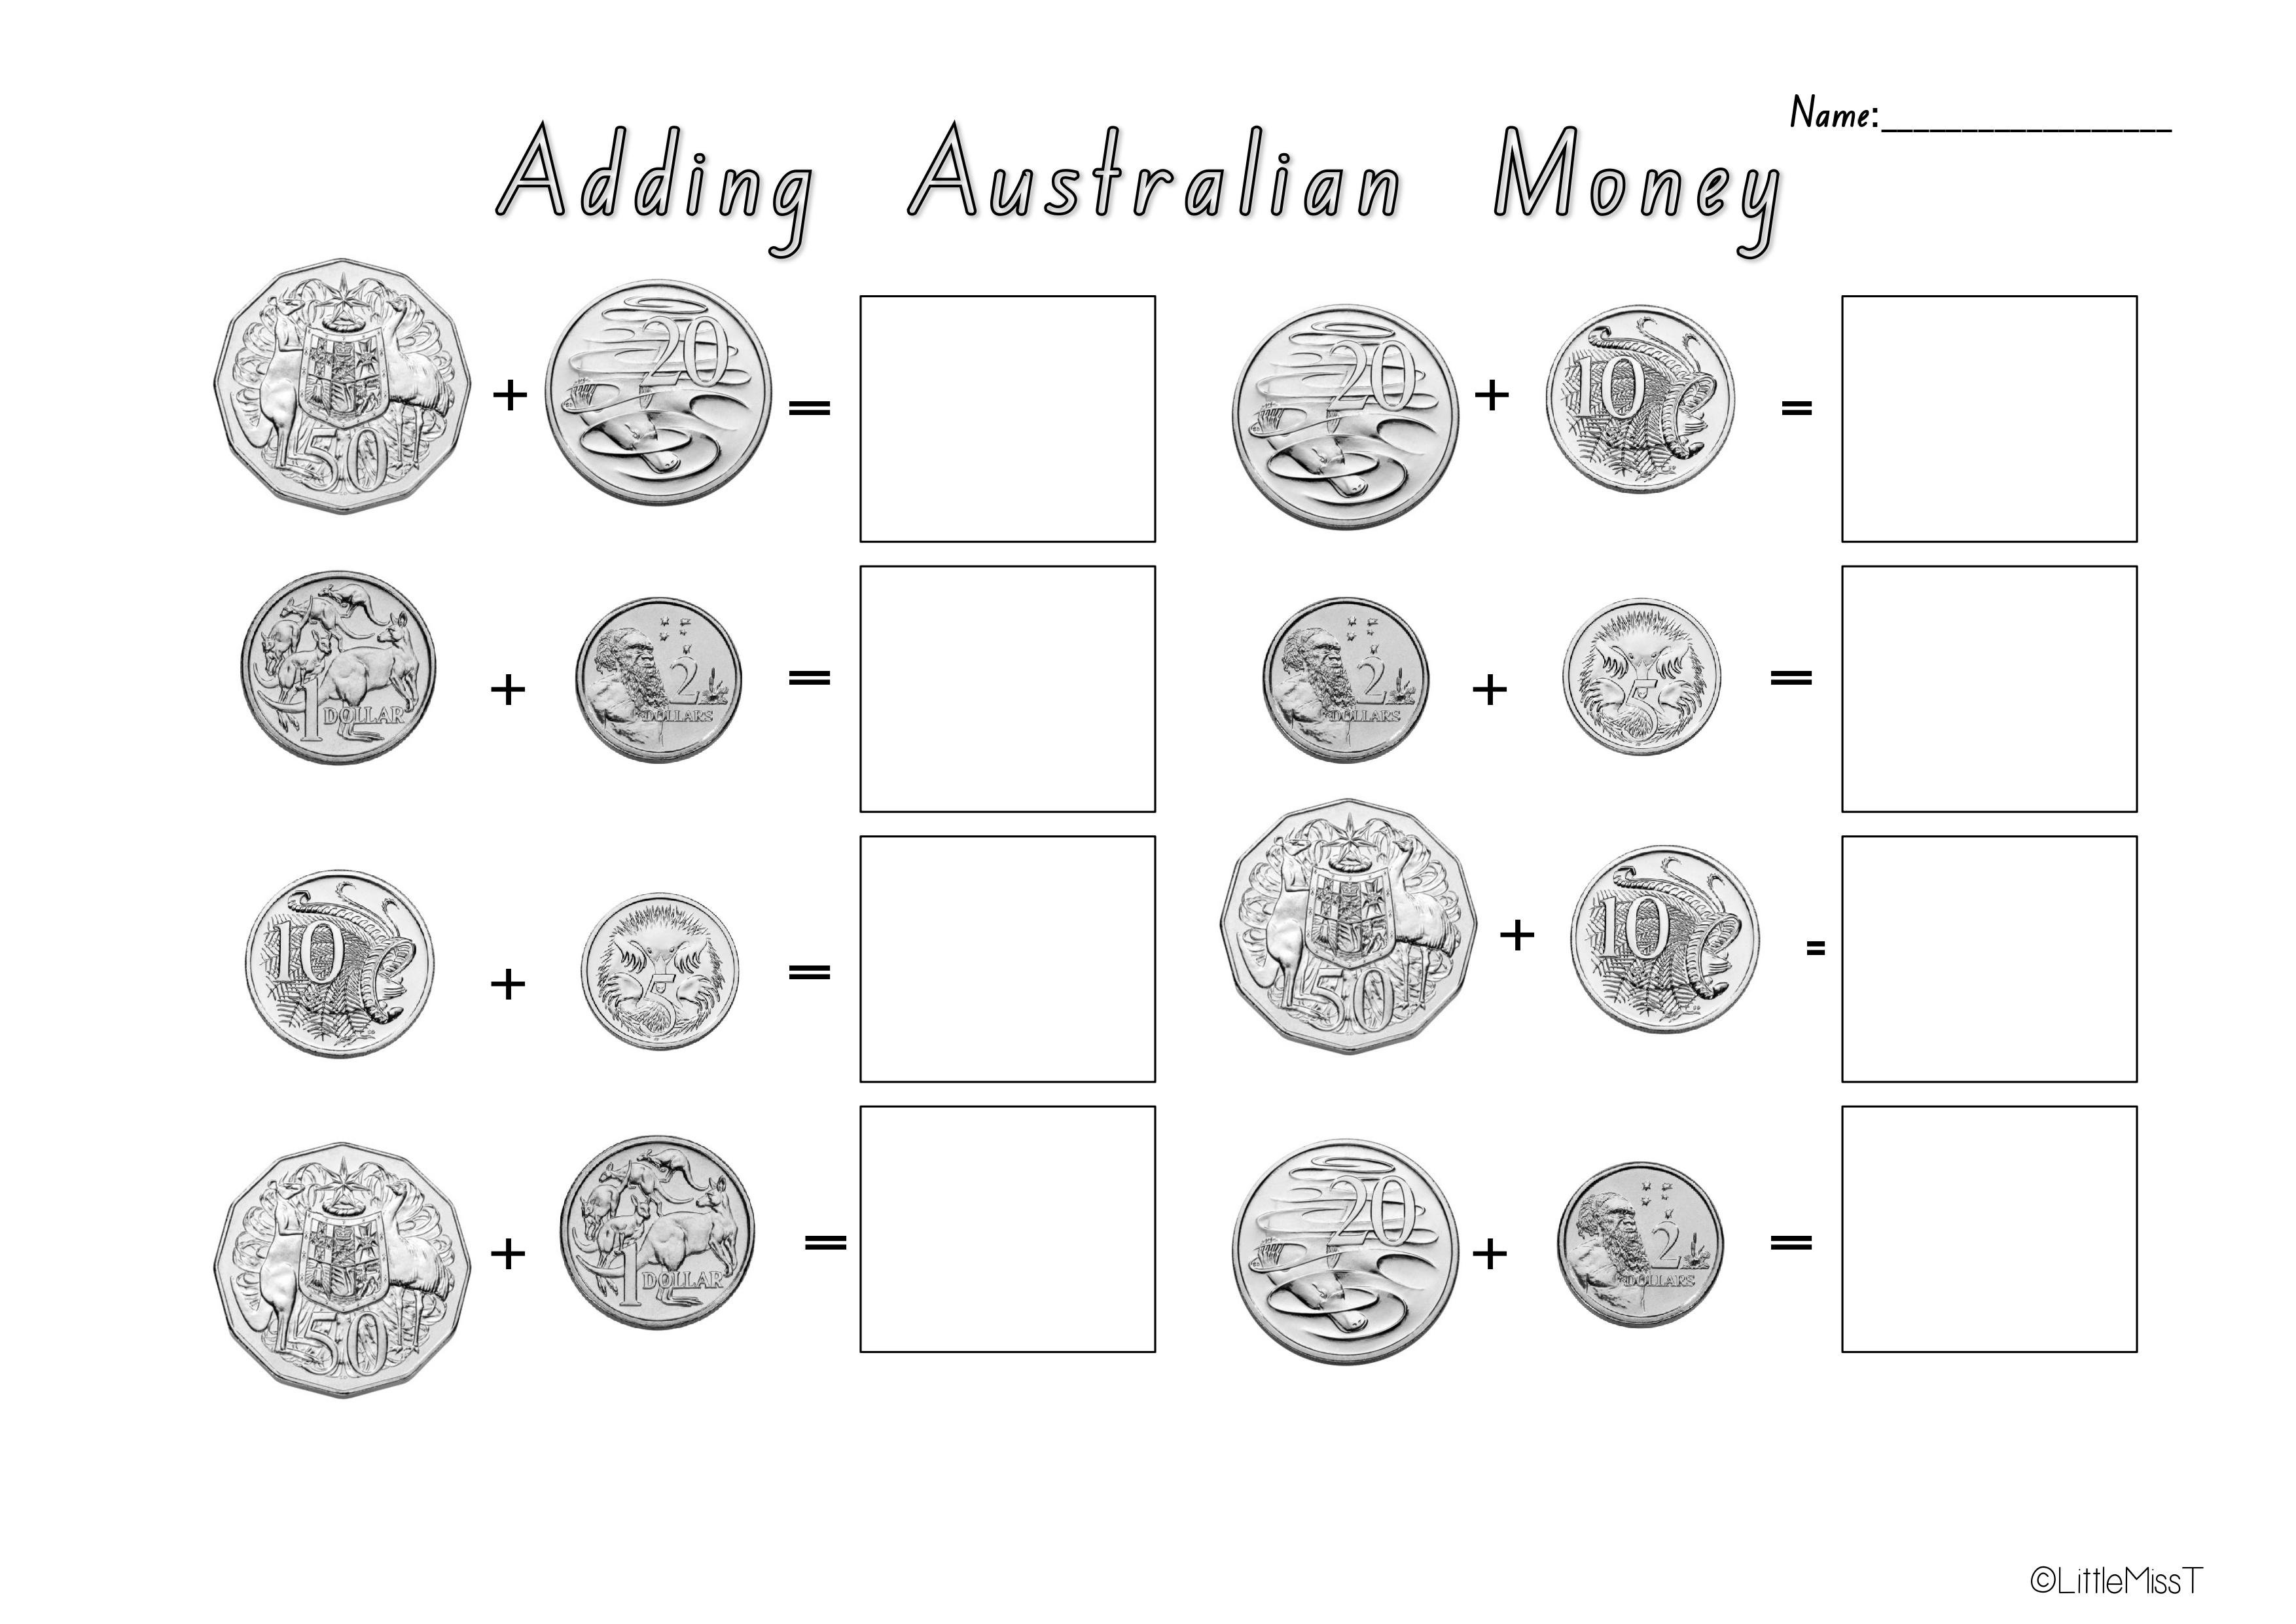 counting-australian-coins-worksheets